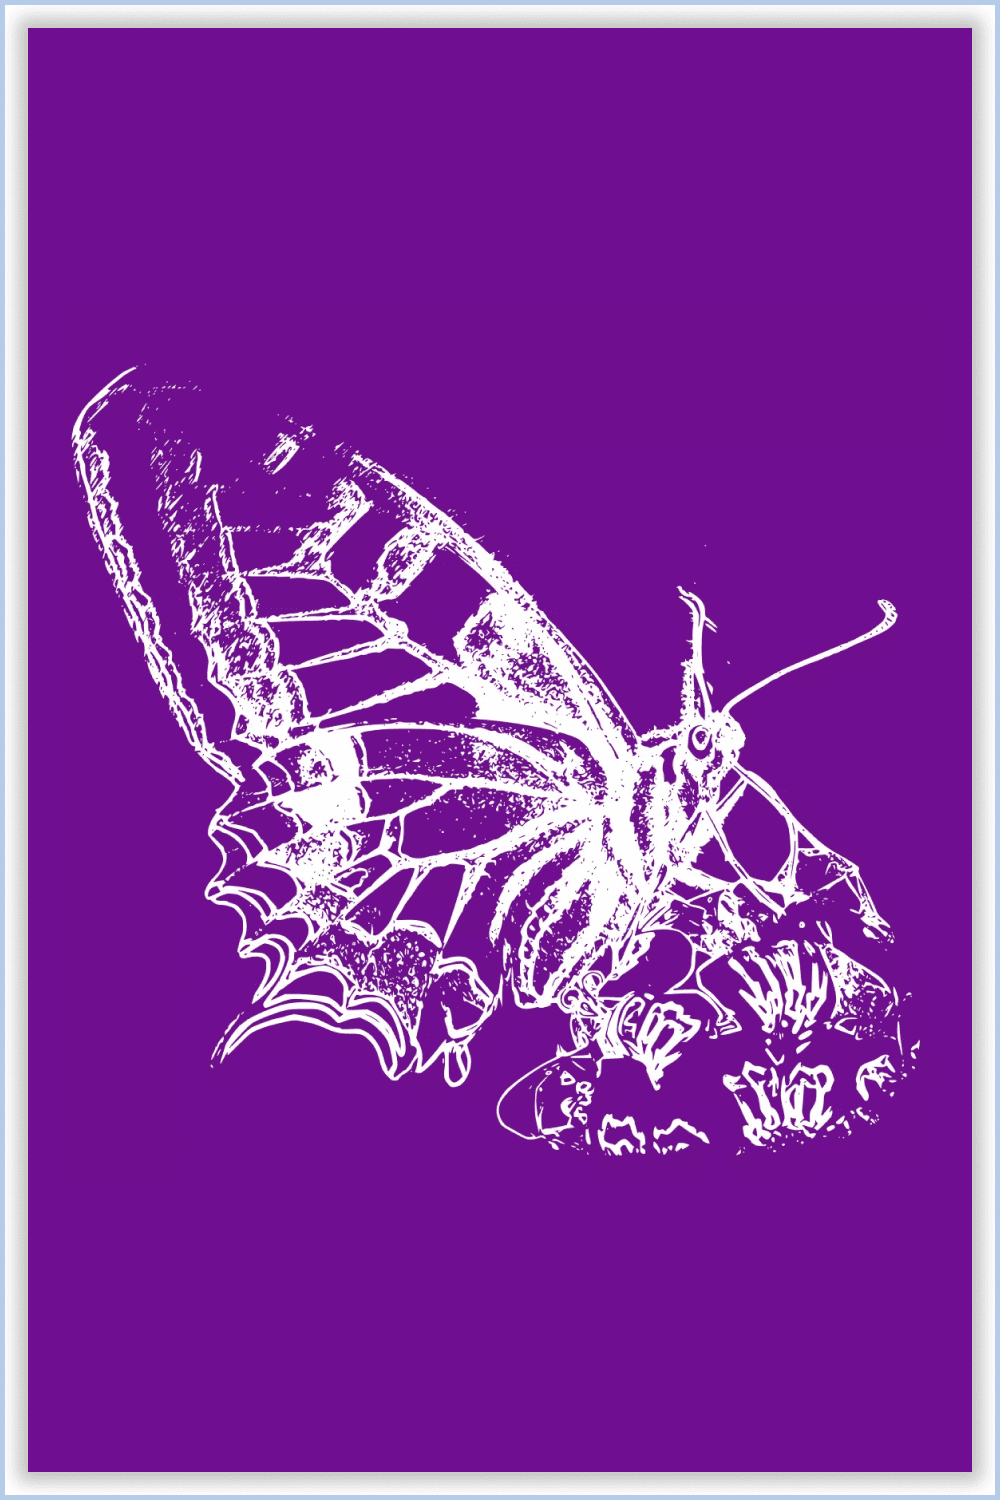 Image of a well-drawn large butterfly on a purple background.